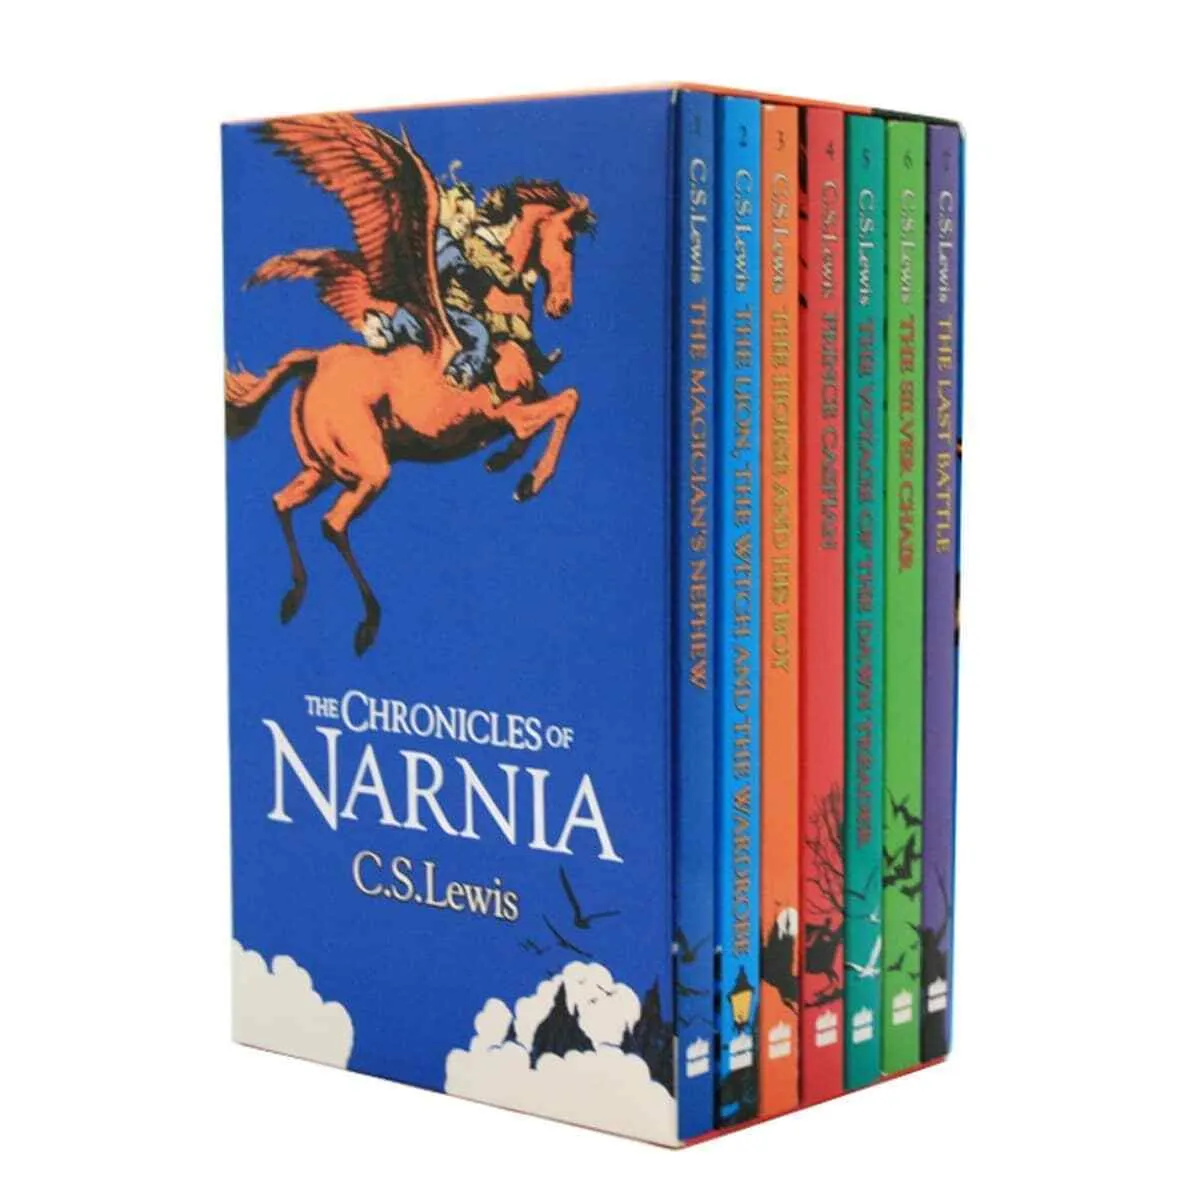 The Chronicles of Narnia 7 Books Box Set Collection